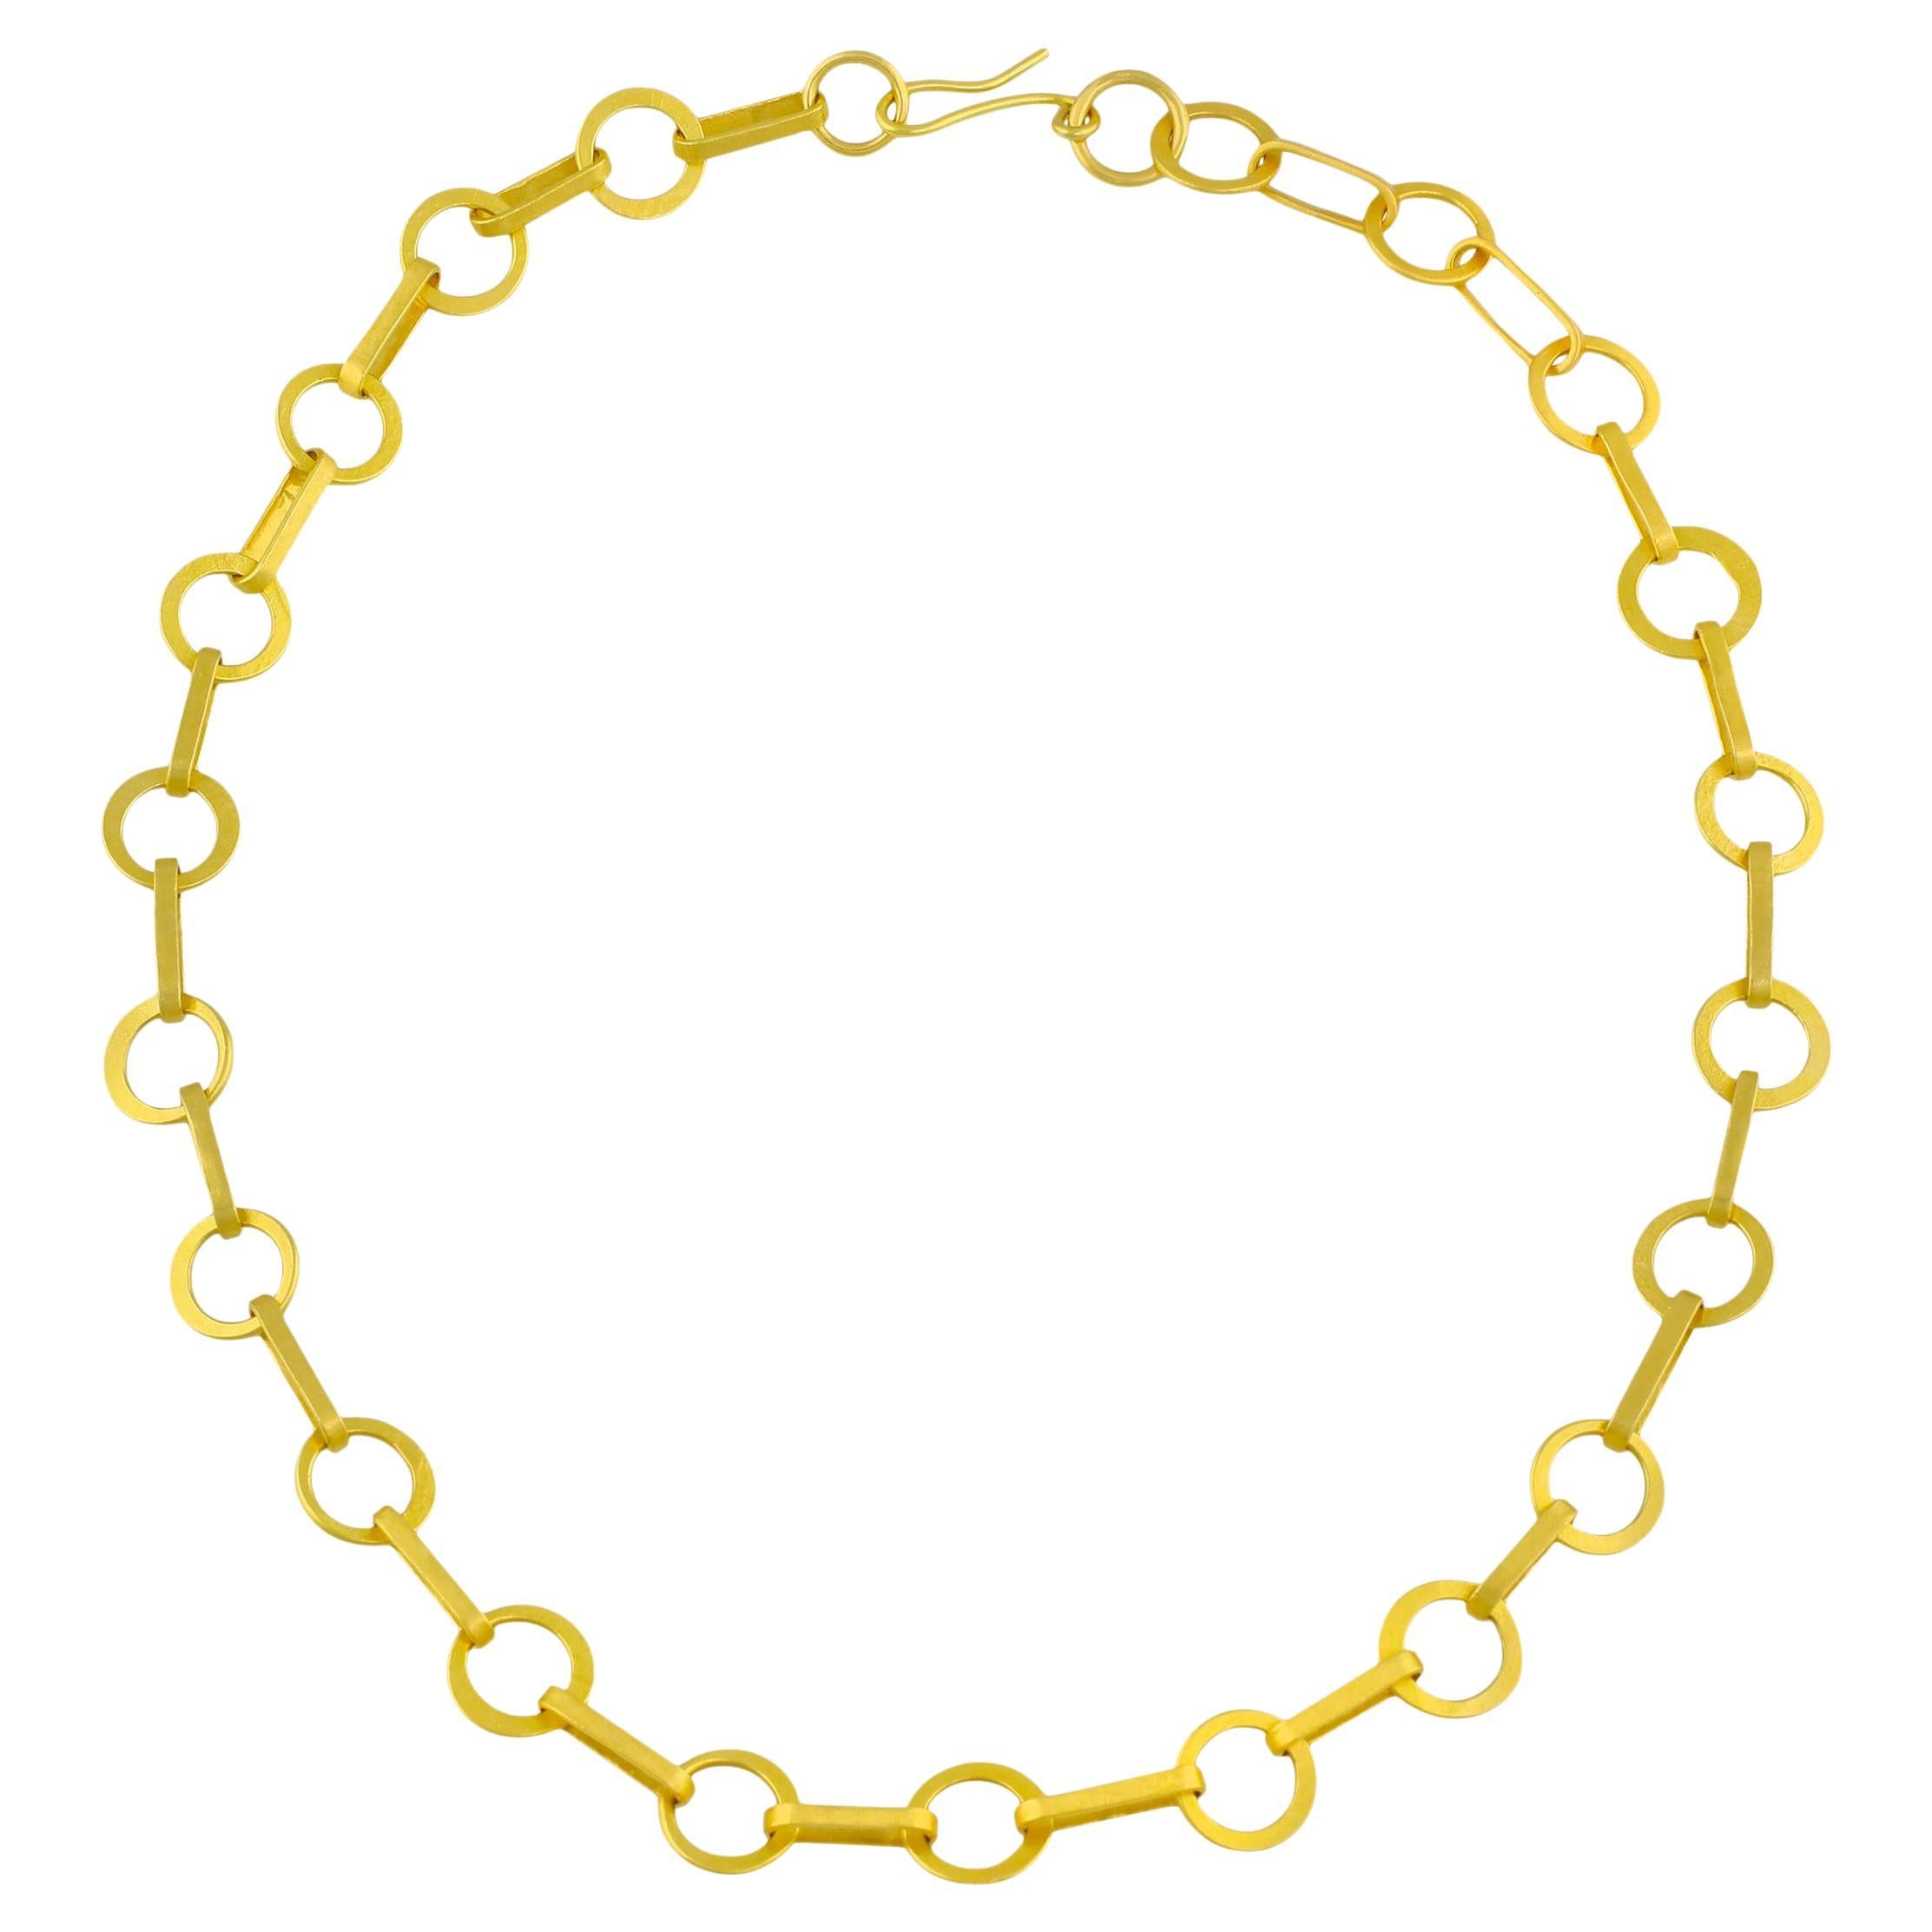 PHILIPPE SPENCER Solid 22K Gold Completely Hand-Forged Round Link Necklace For Sale